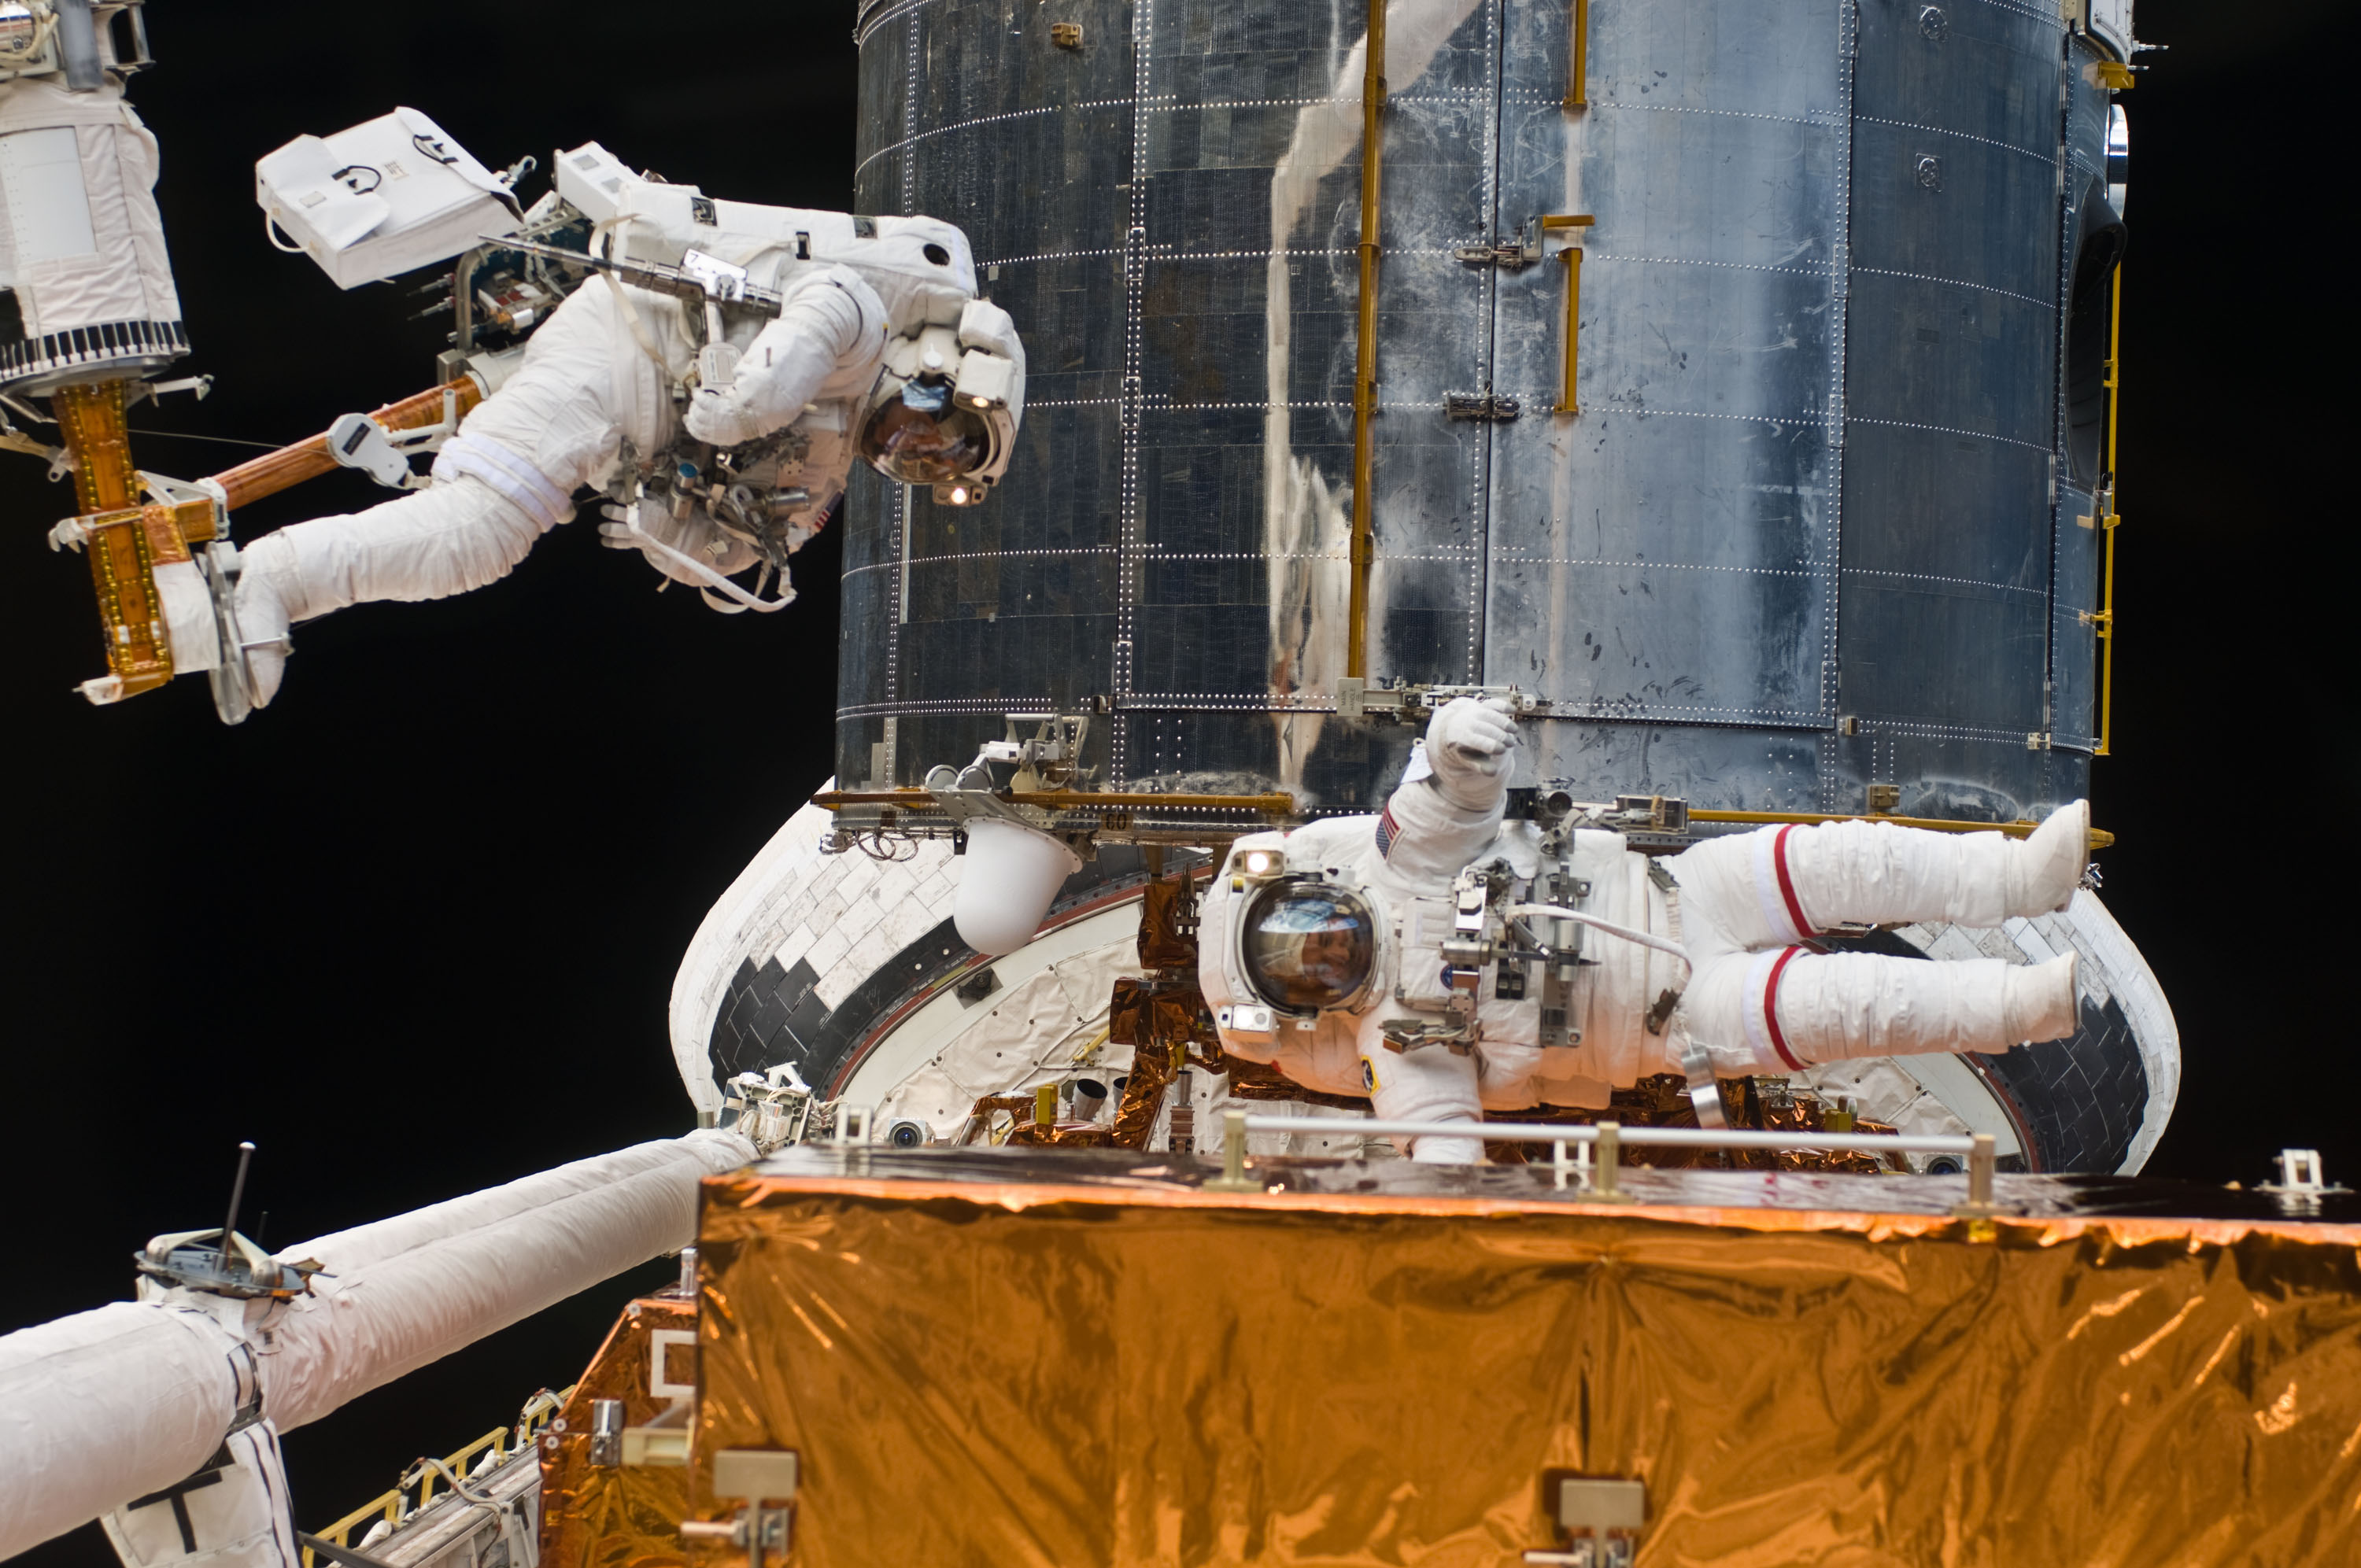 One astronaut working on Hubble floats on his side, another is attached by his feet to the shuttle's robotic arm.